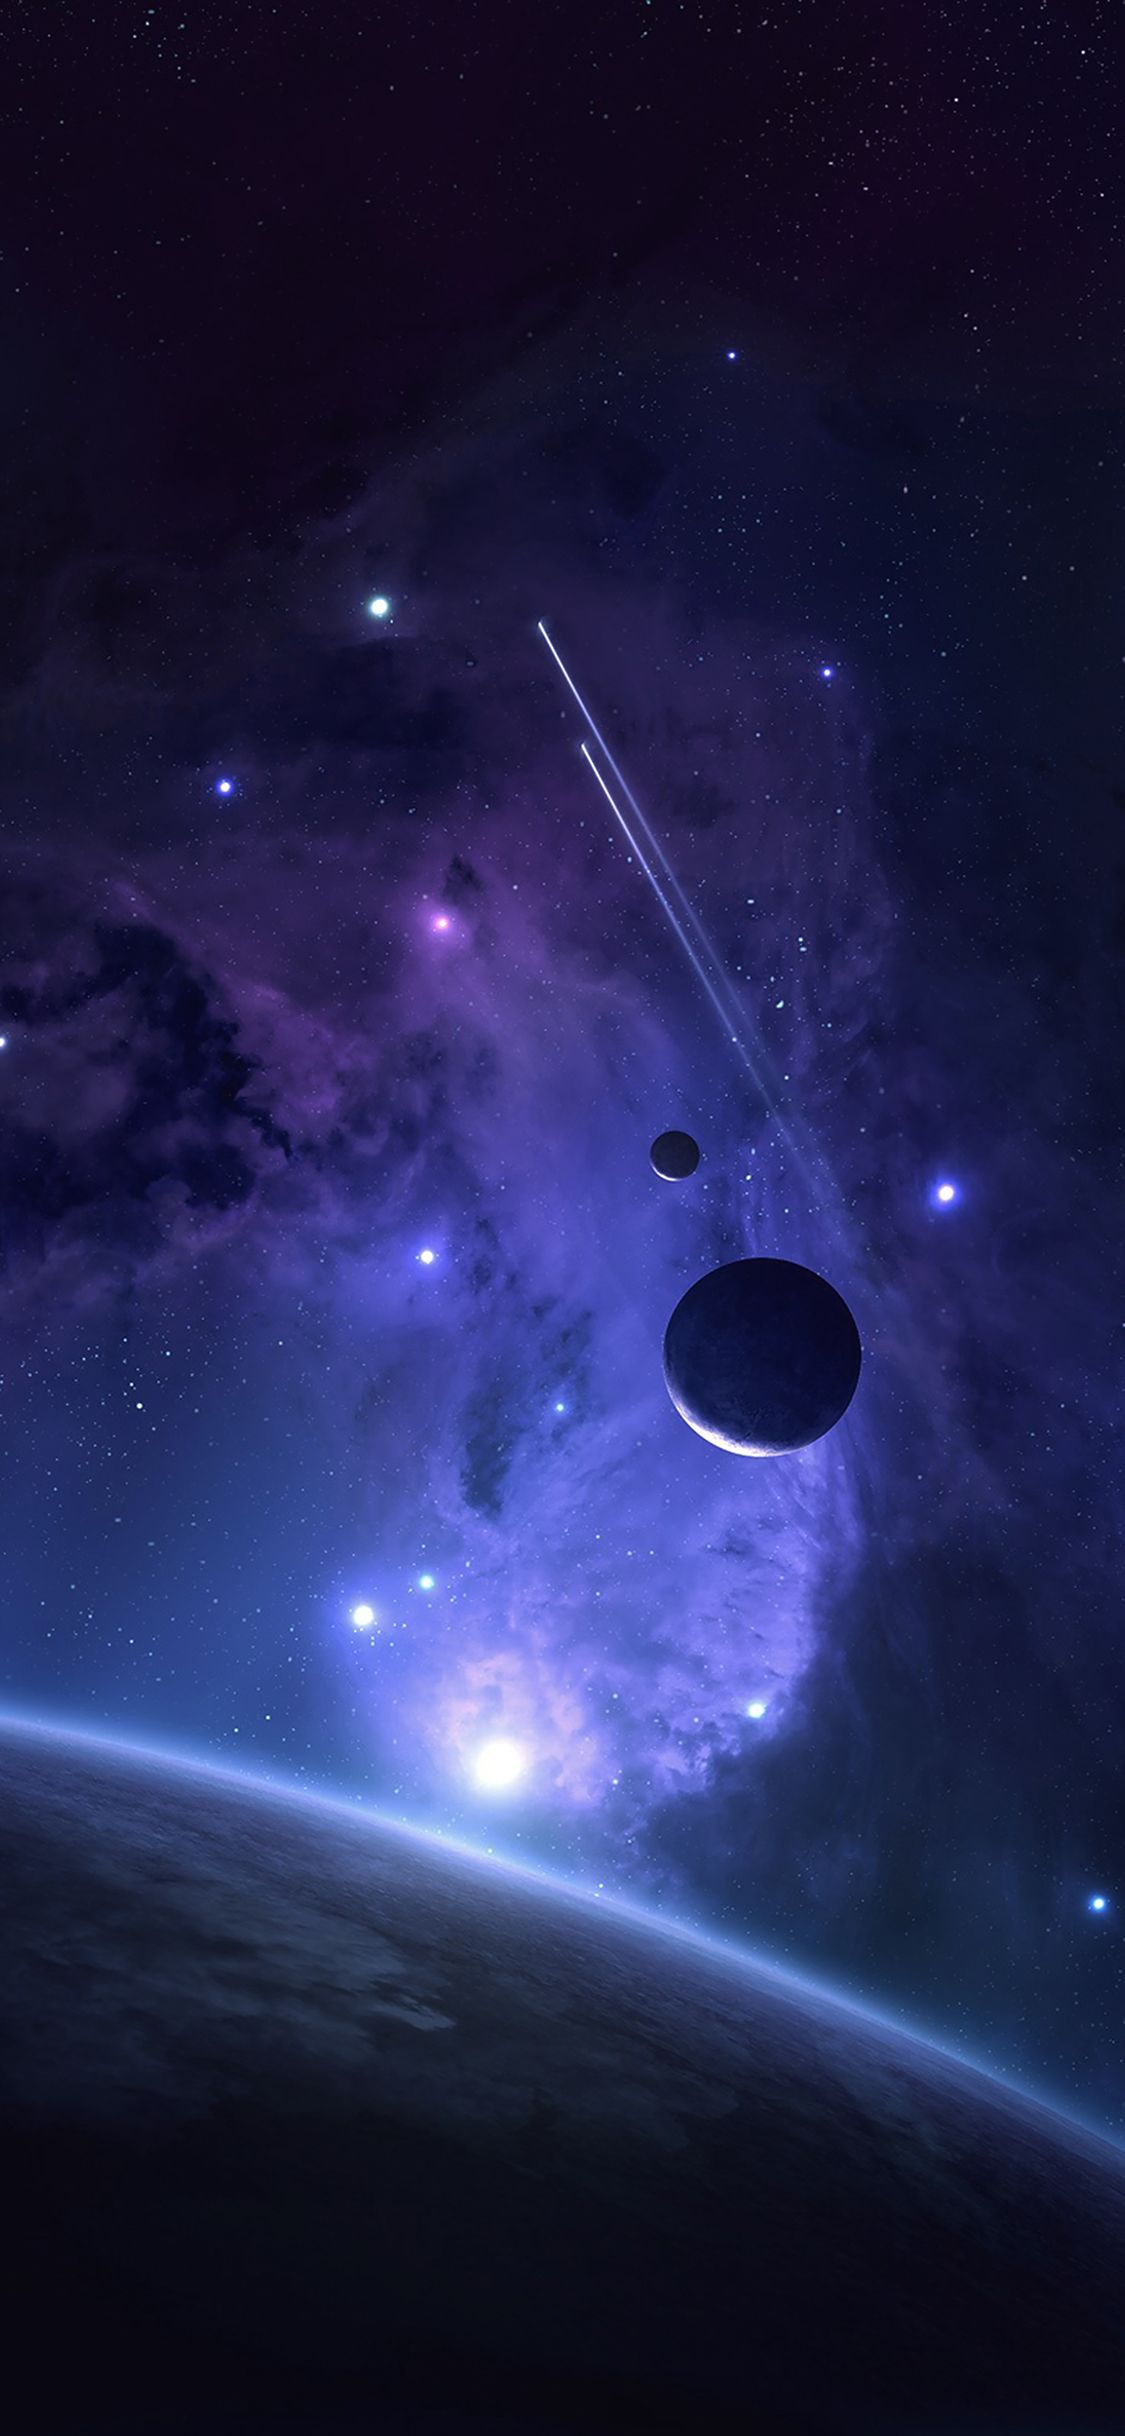 iPhoneX wallpaper: planets space abstract blue art. New